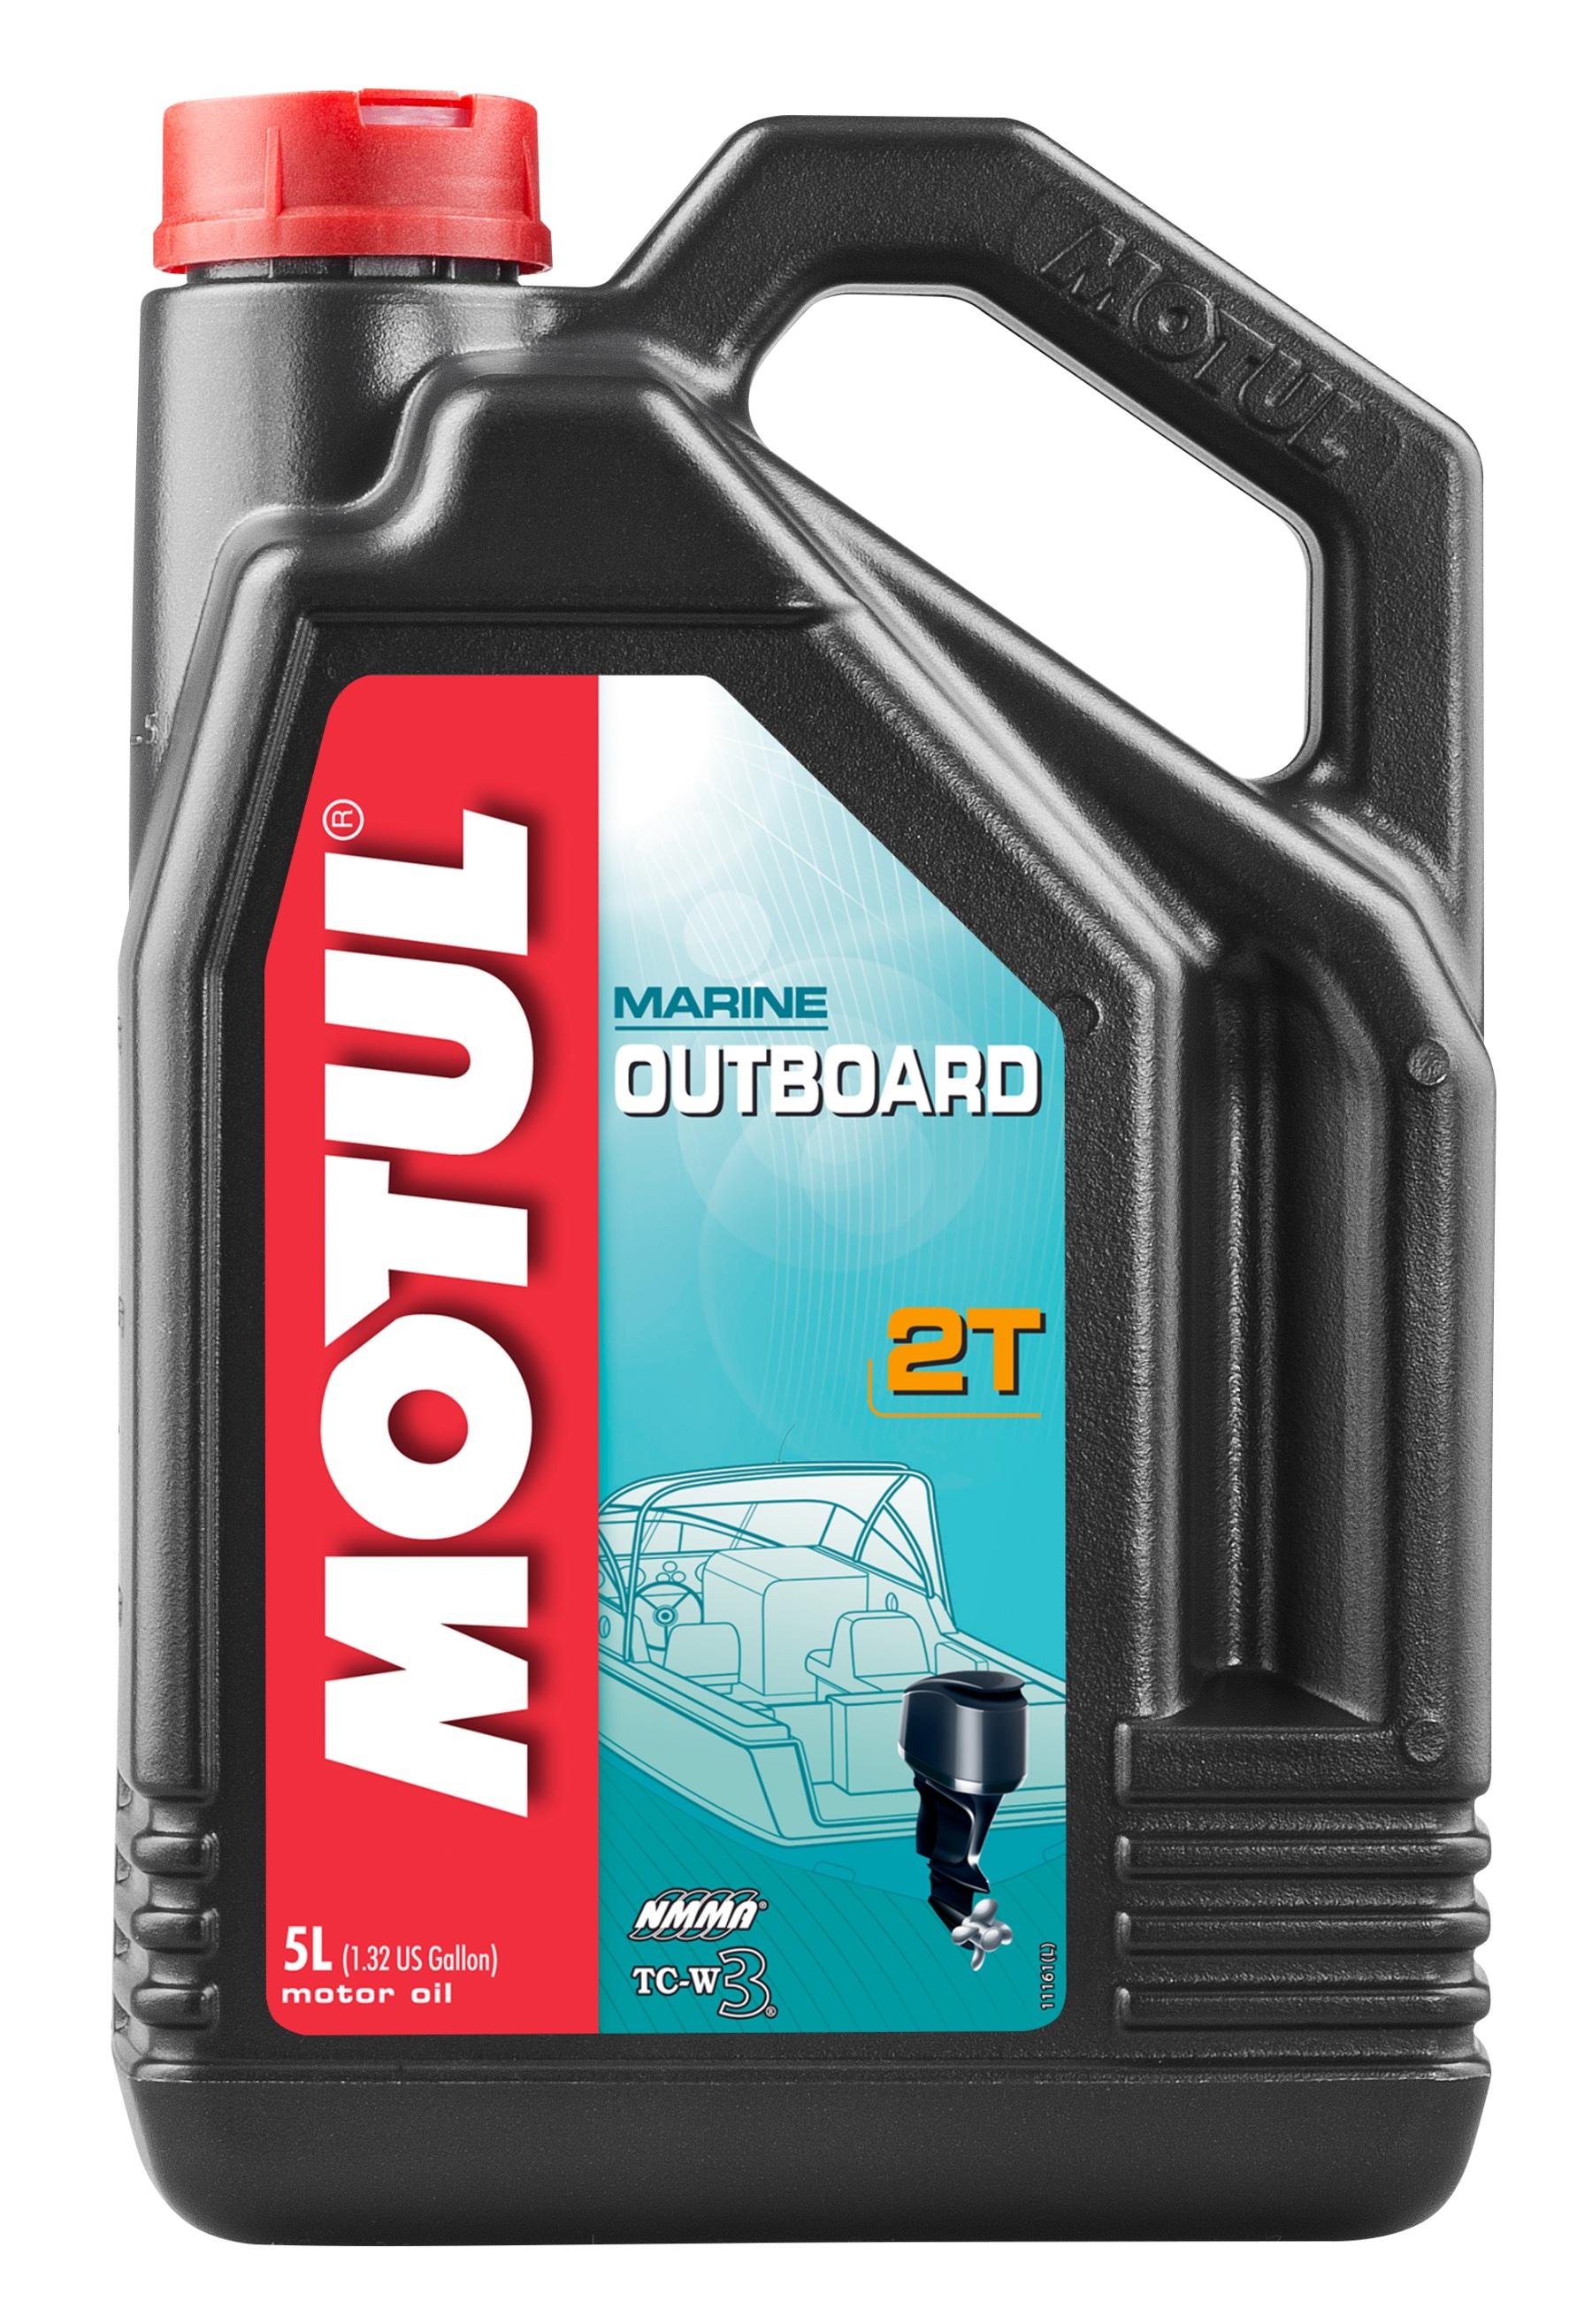 Моторное масло MOTUL Outboard 2T 5л (851851 / 101734)